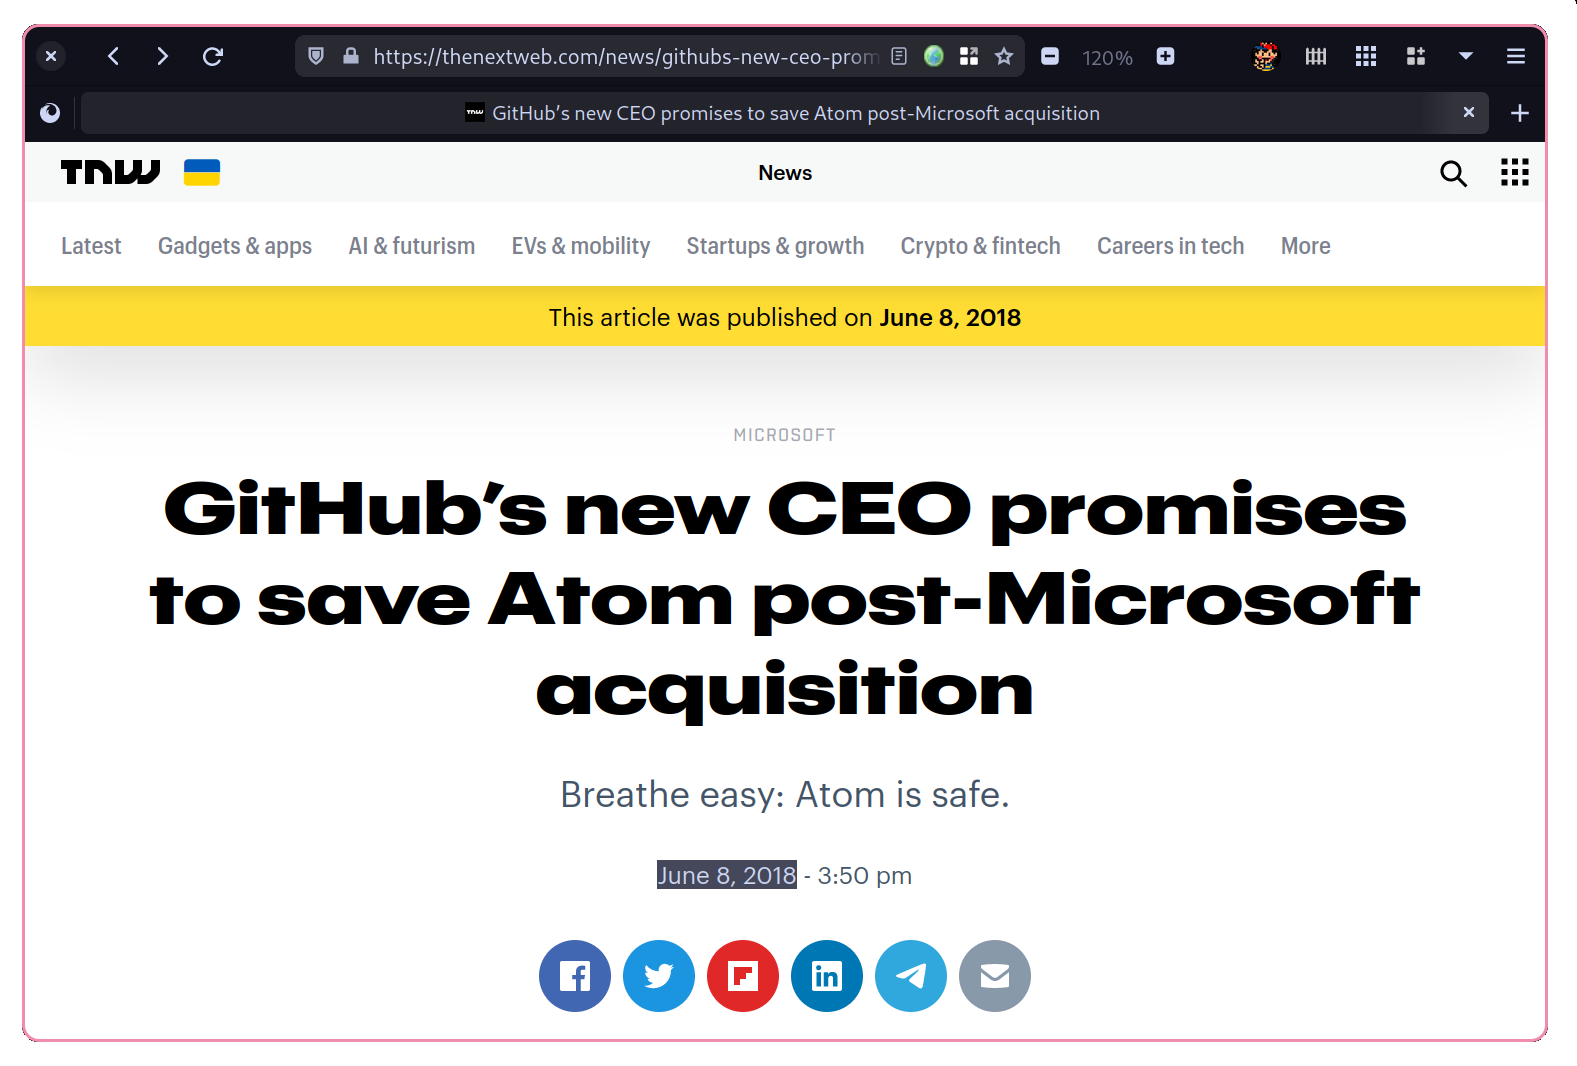 Headline: GitHub's new CEO promises to save Atom post-Microsoft acquisition